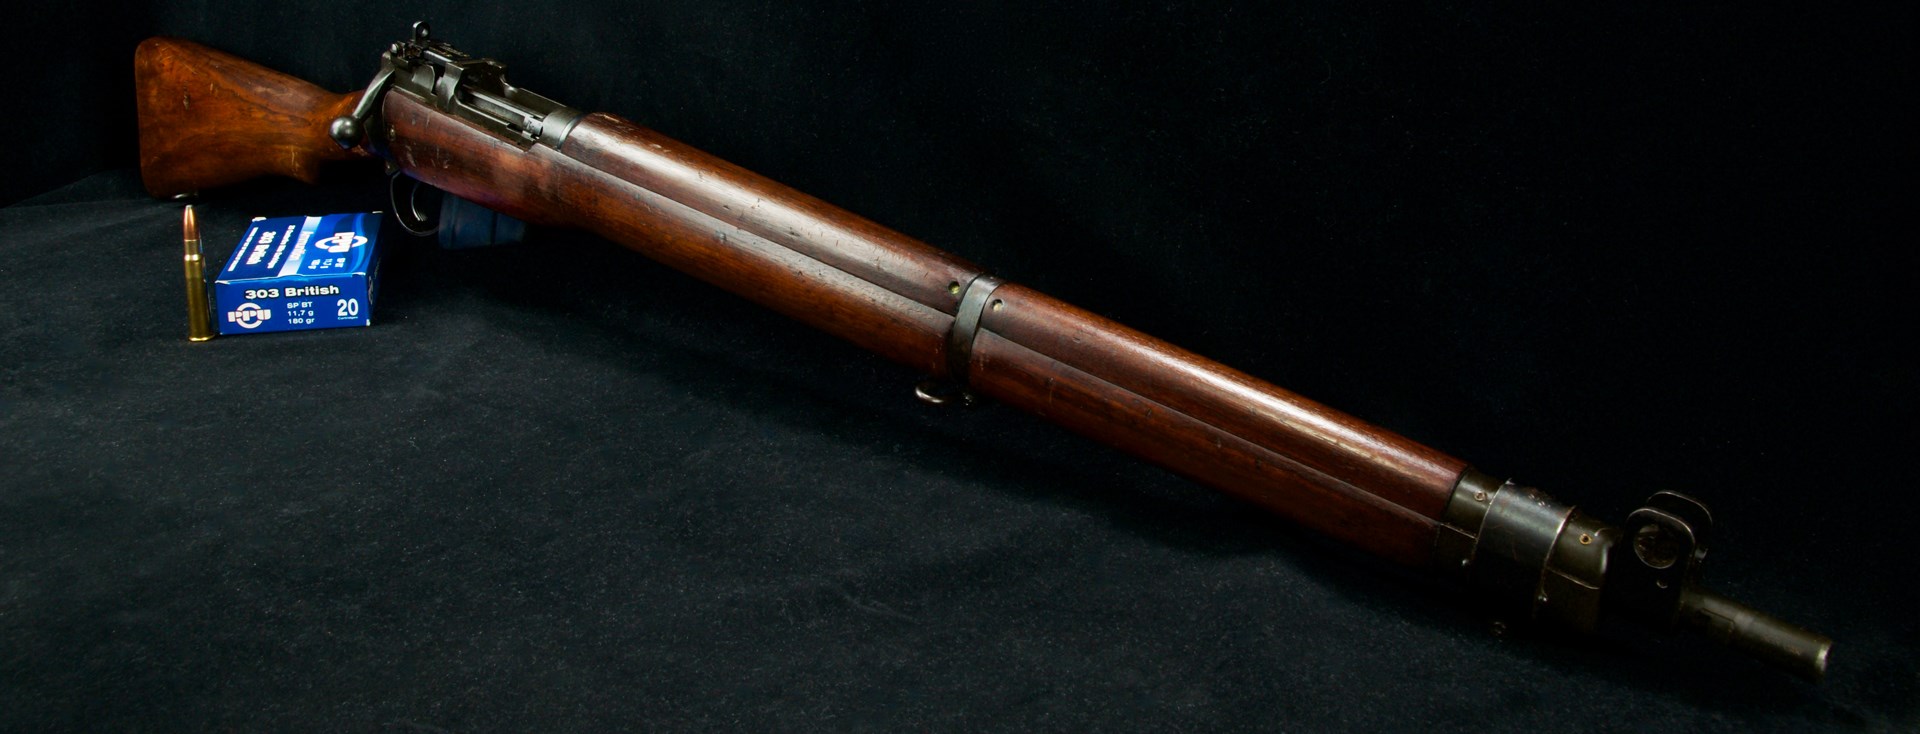 dynamic quarter view of lee-enfield bolt-action military surplus rifle black background shown with blue box of .303 British ammunition